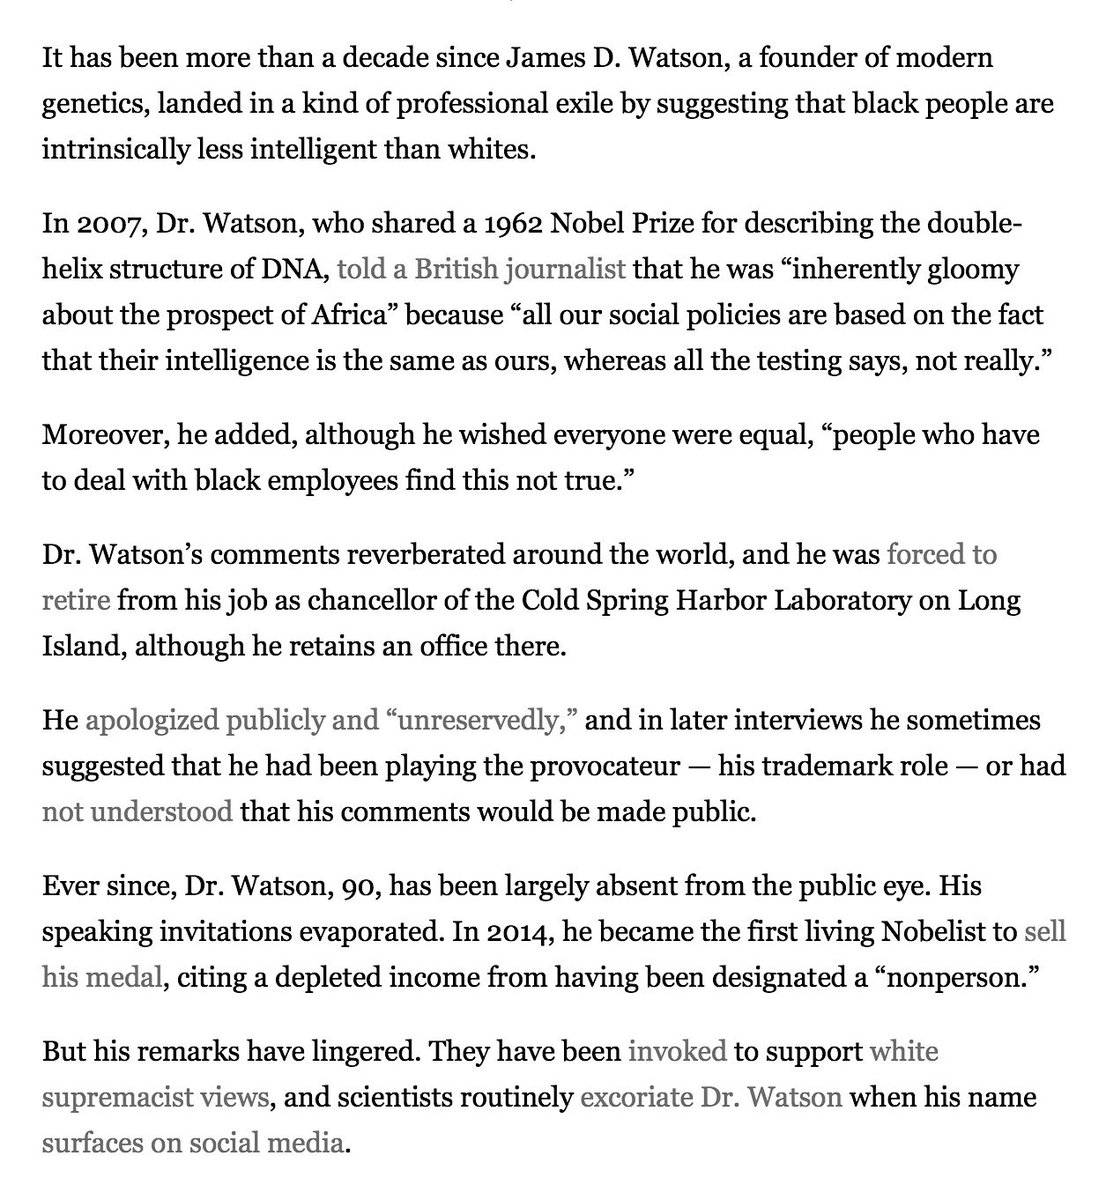 A Decade Ago, James D. Watson, Founder Of Modern Genetics And One Of The Most Influential Scientists Of The 20th Century, Landed In A 'Professional Exile' By Suggesting That Black People Are Intrinsically Less Intelligent Than Whites. https://www.nytimes.com/2019/01/01/science/watson-dna-genetics-race.html?module=inline #QAnon  @potus